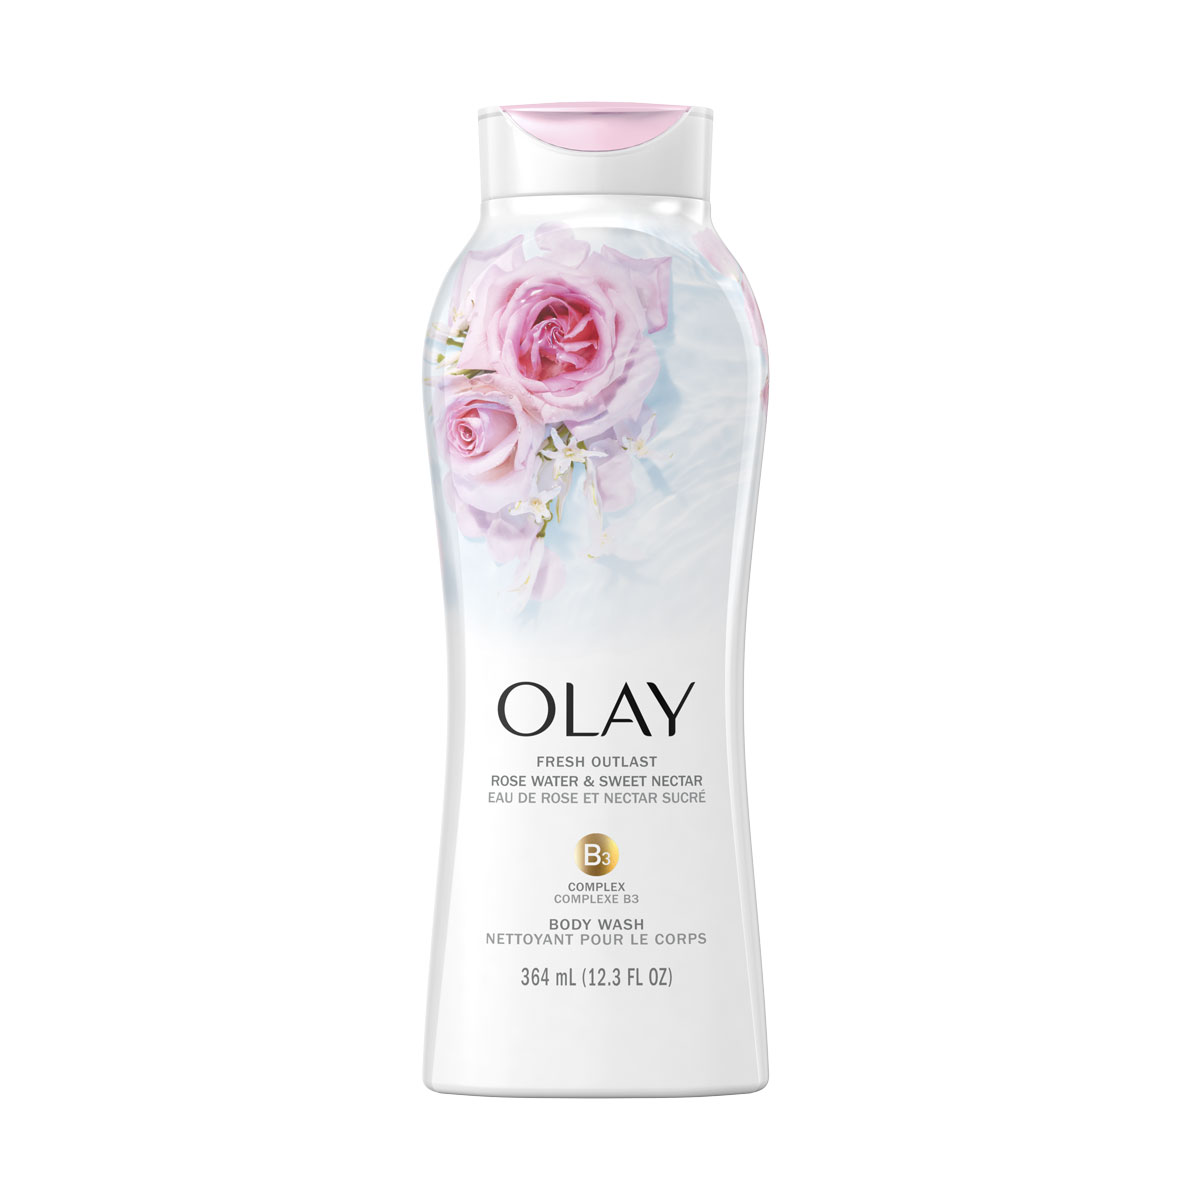 Sabonete Líquido Olay Out. Rose Water & Sw. Nectar 364 ml